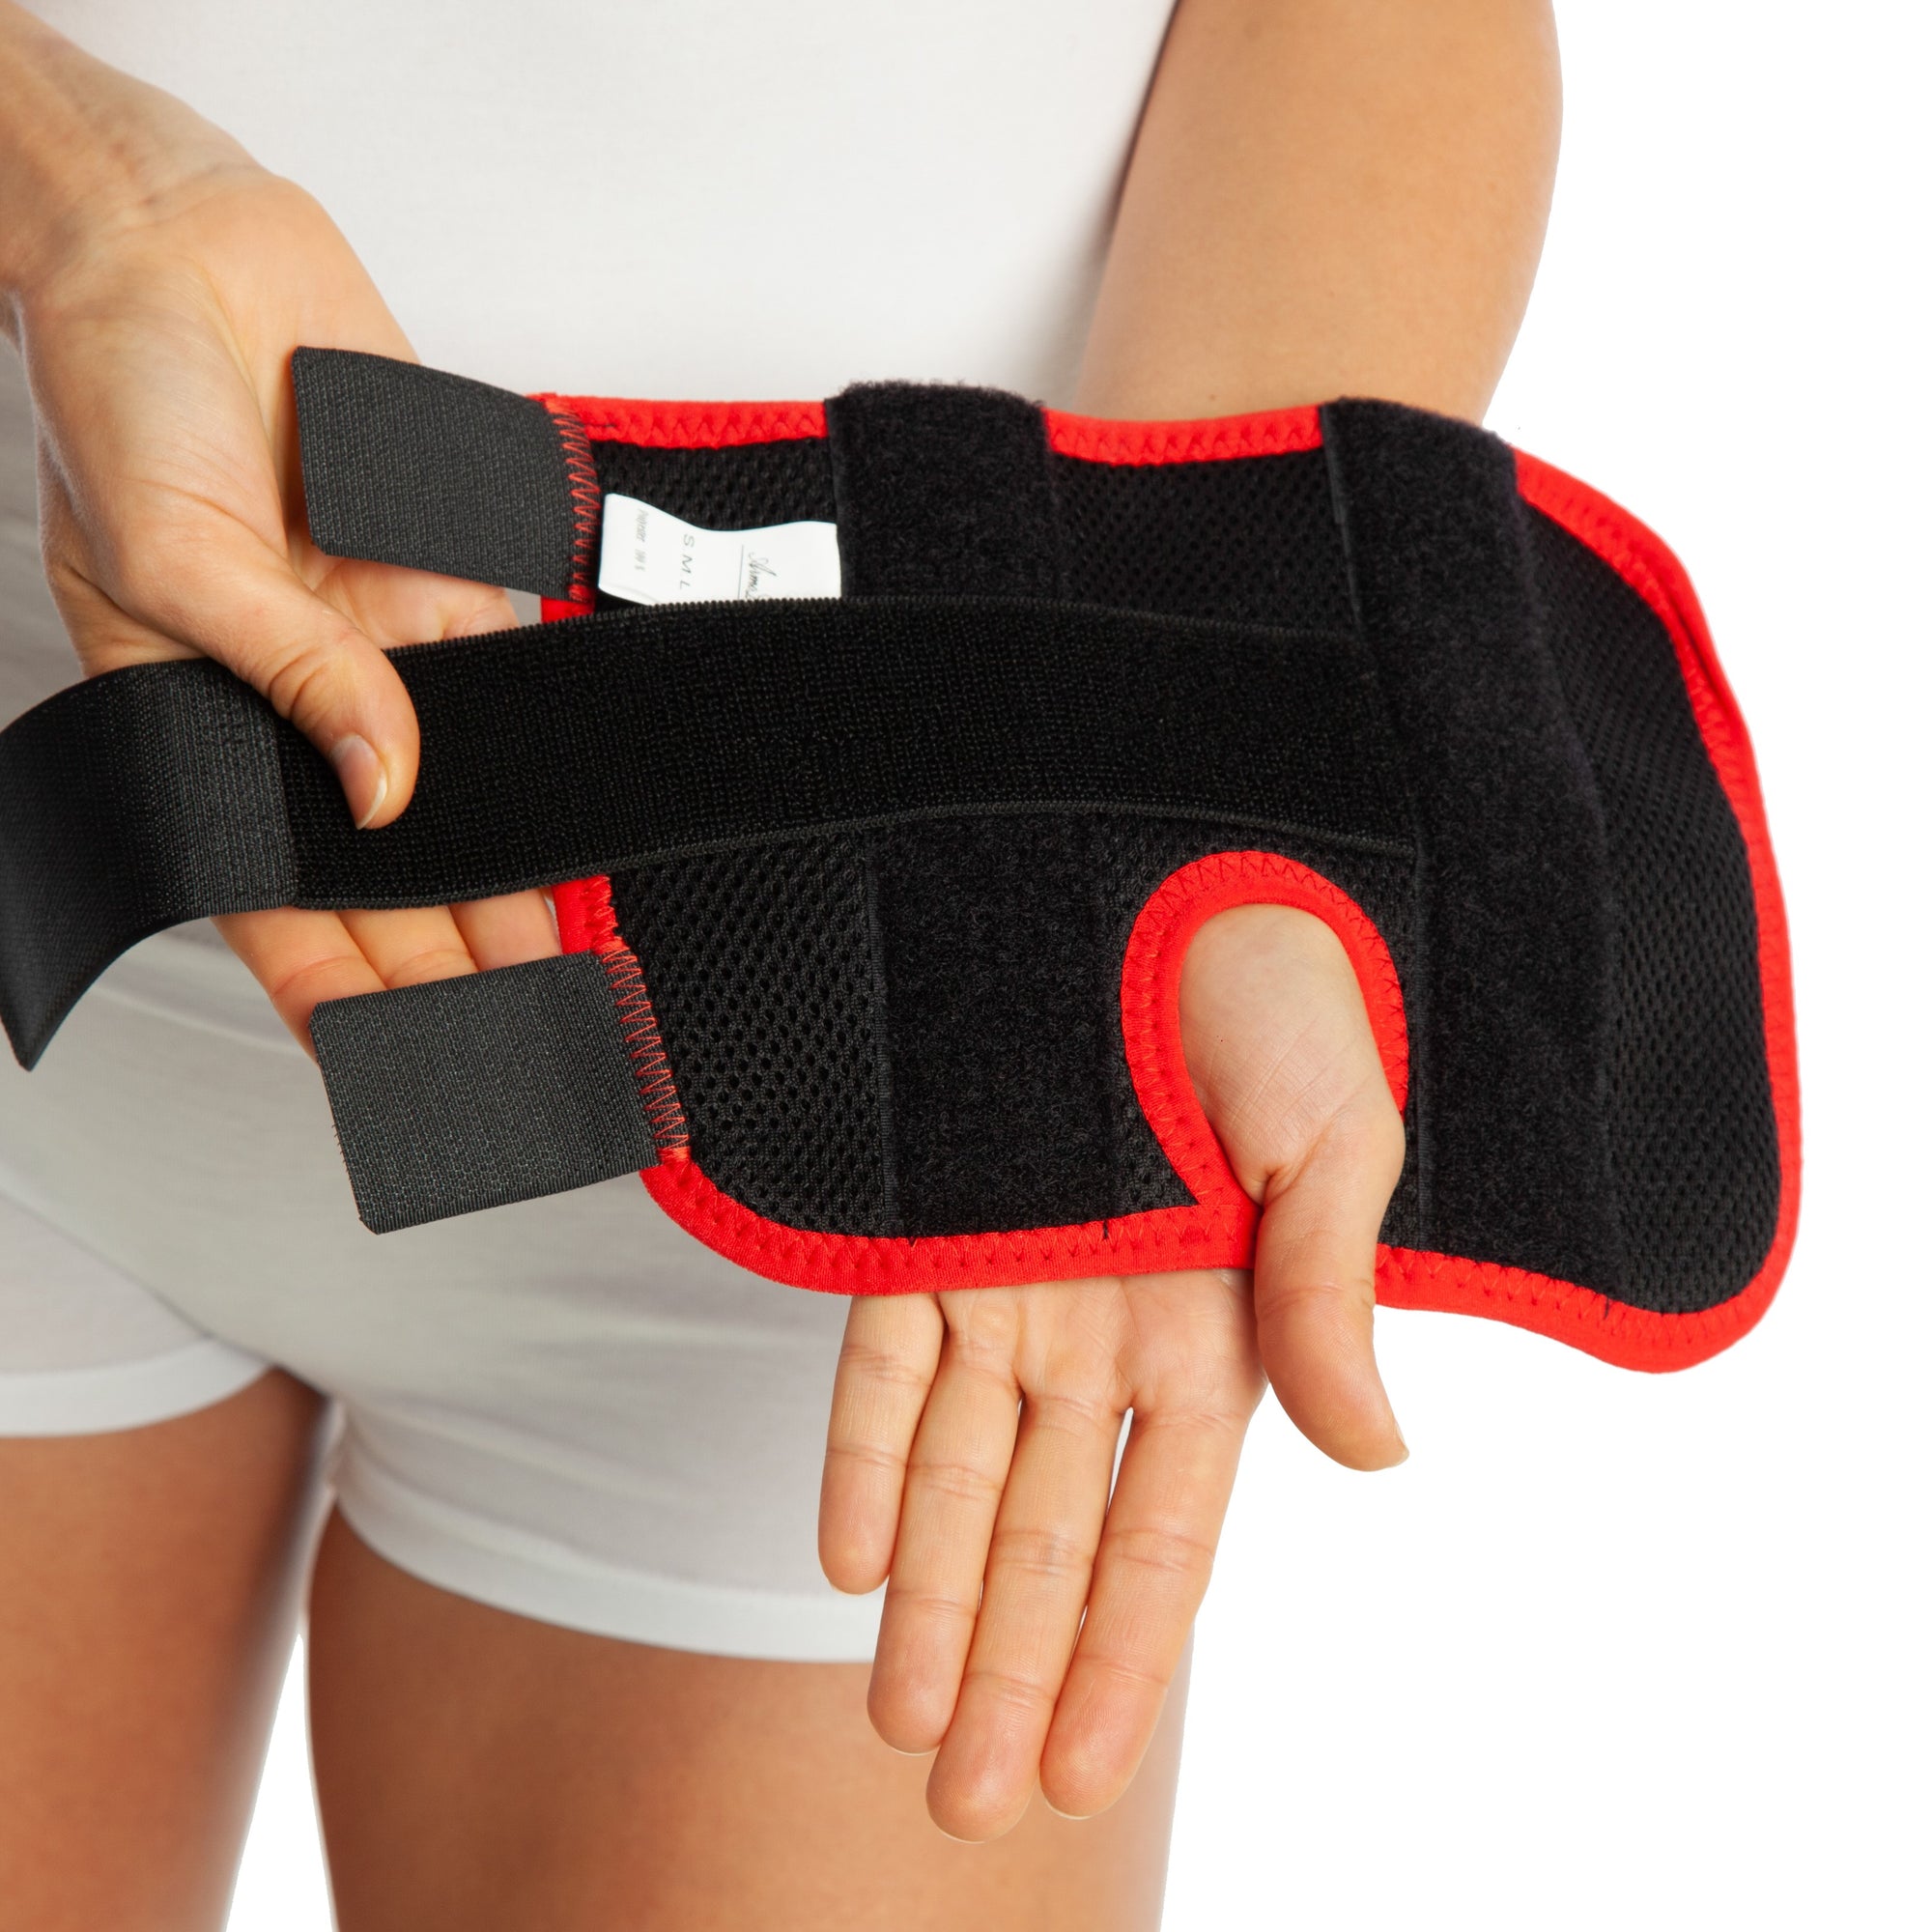 ArmoLine Carpal Wrist and Thumb Support close photoshoot